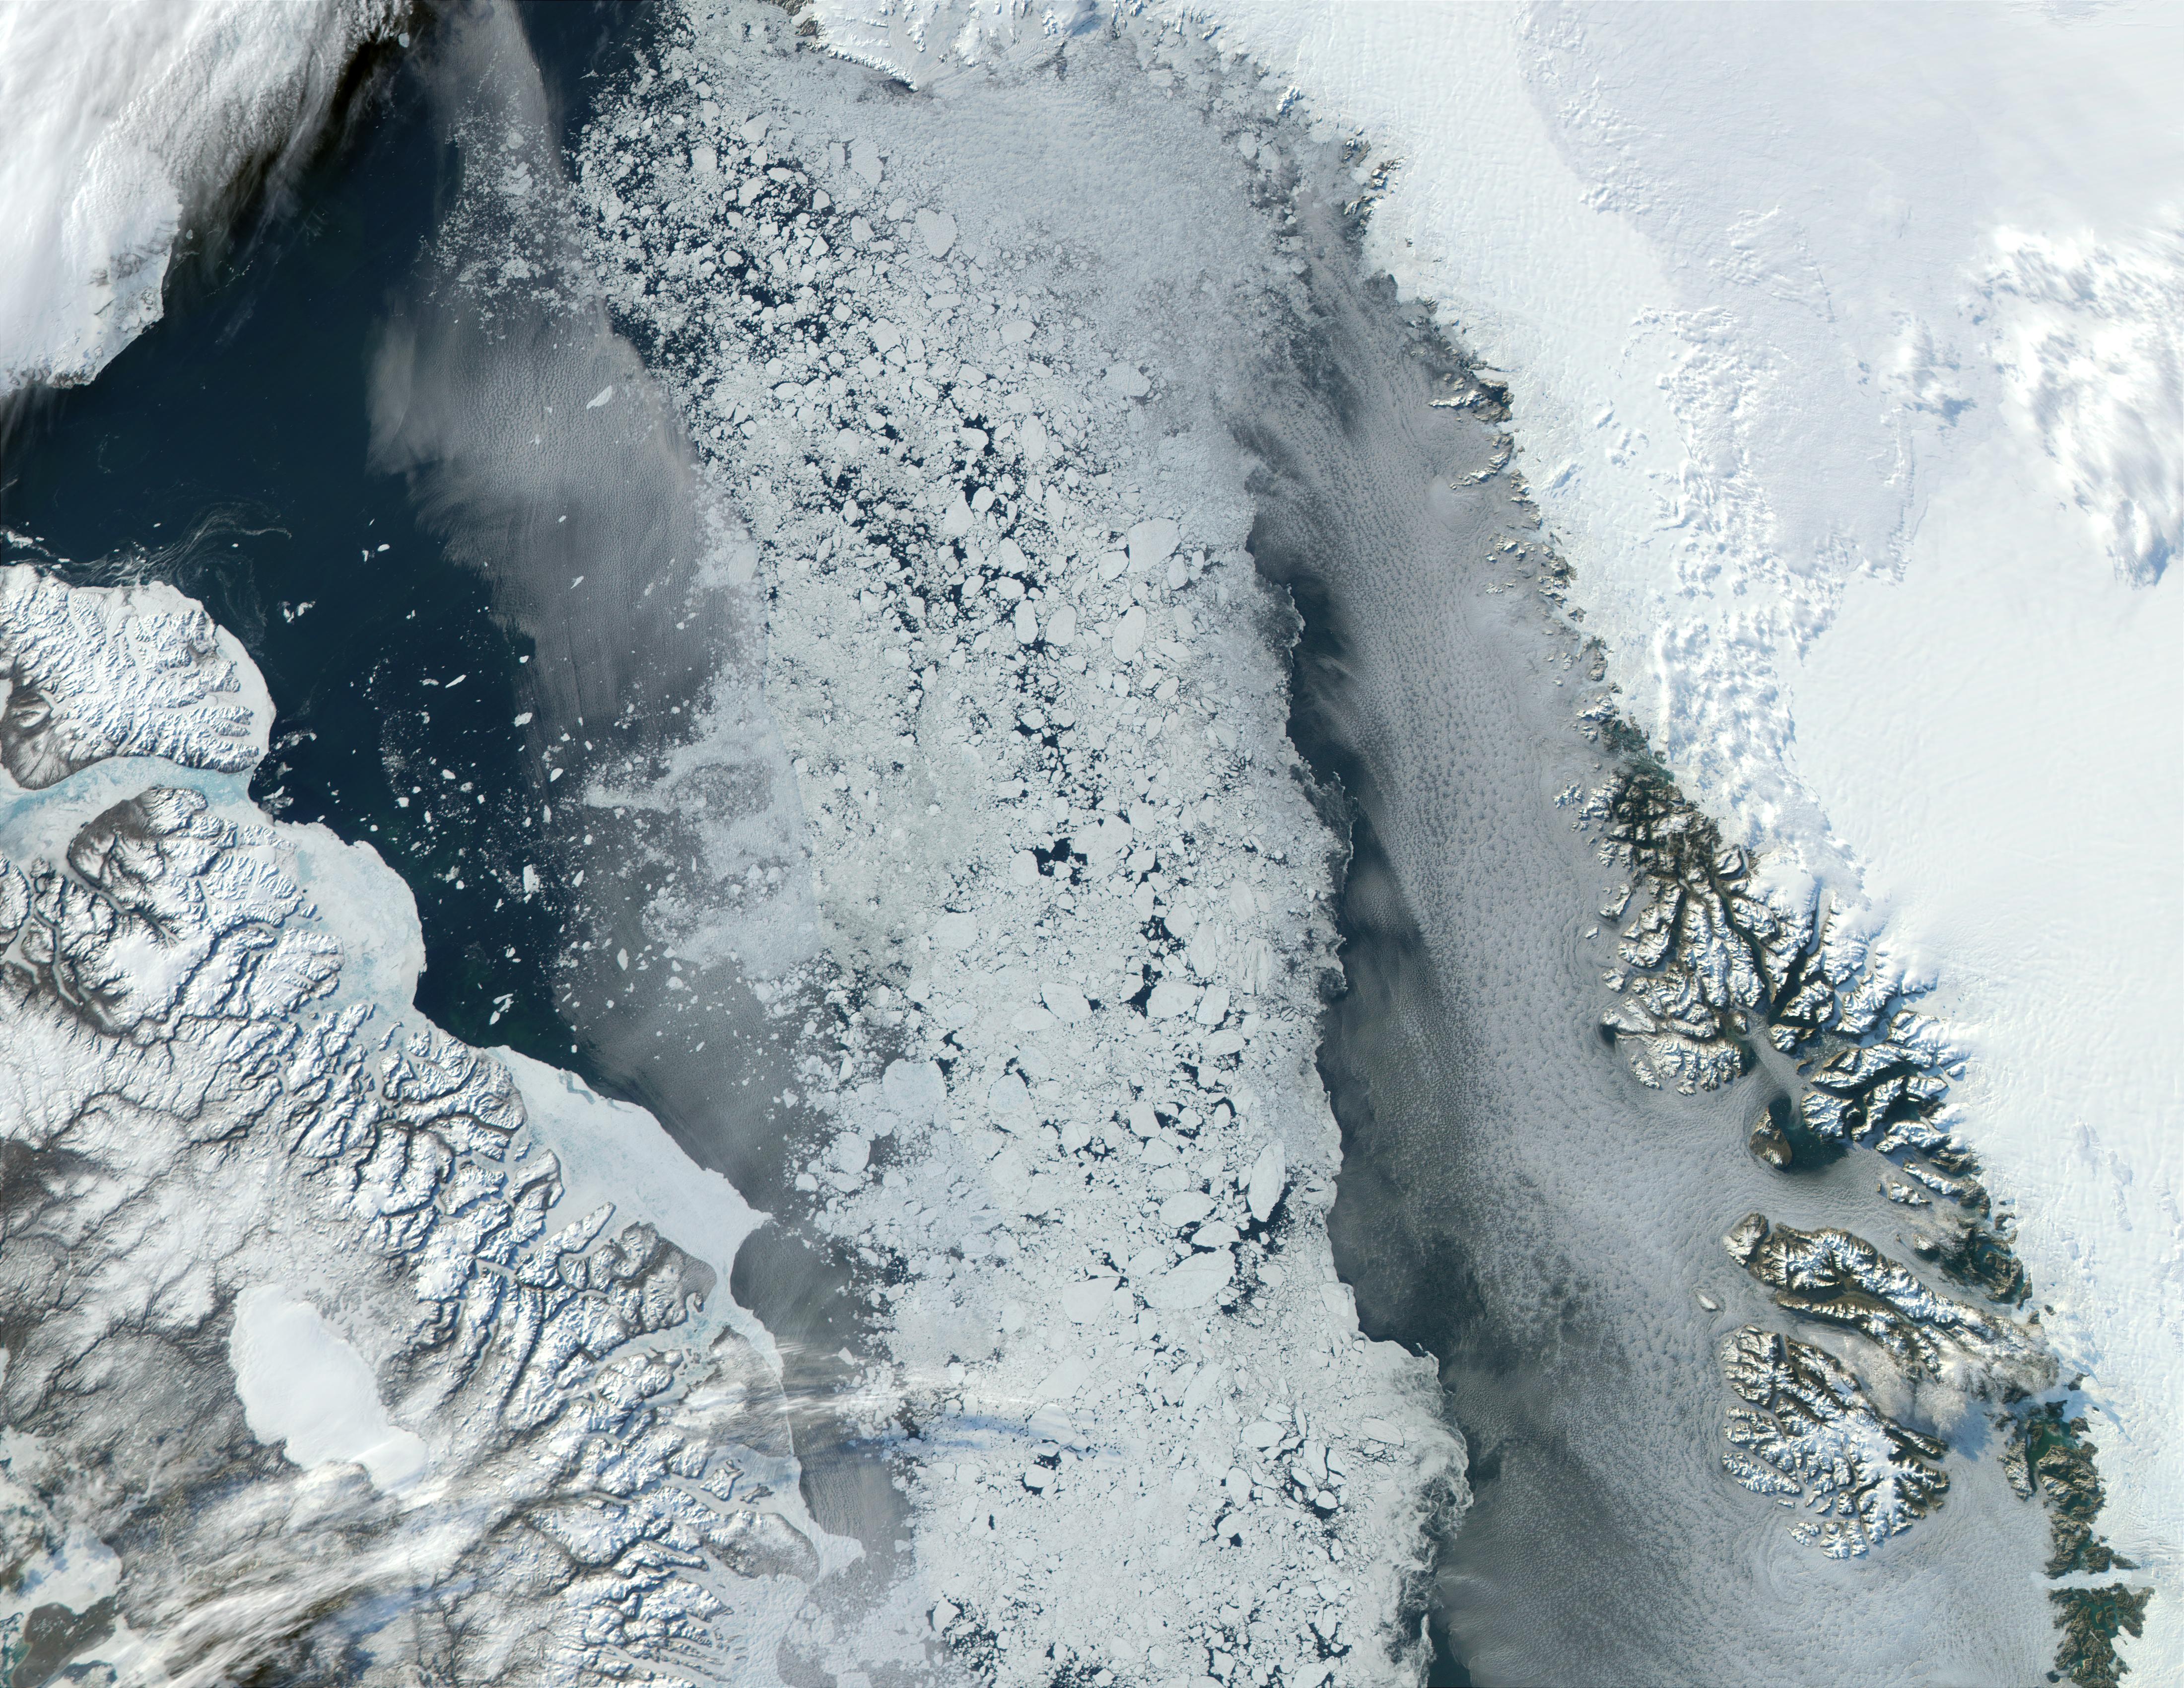 Baffin Bay, North Canada - related image preview